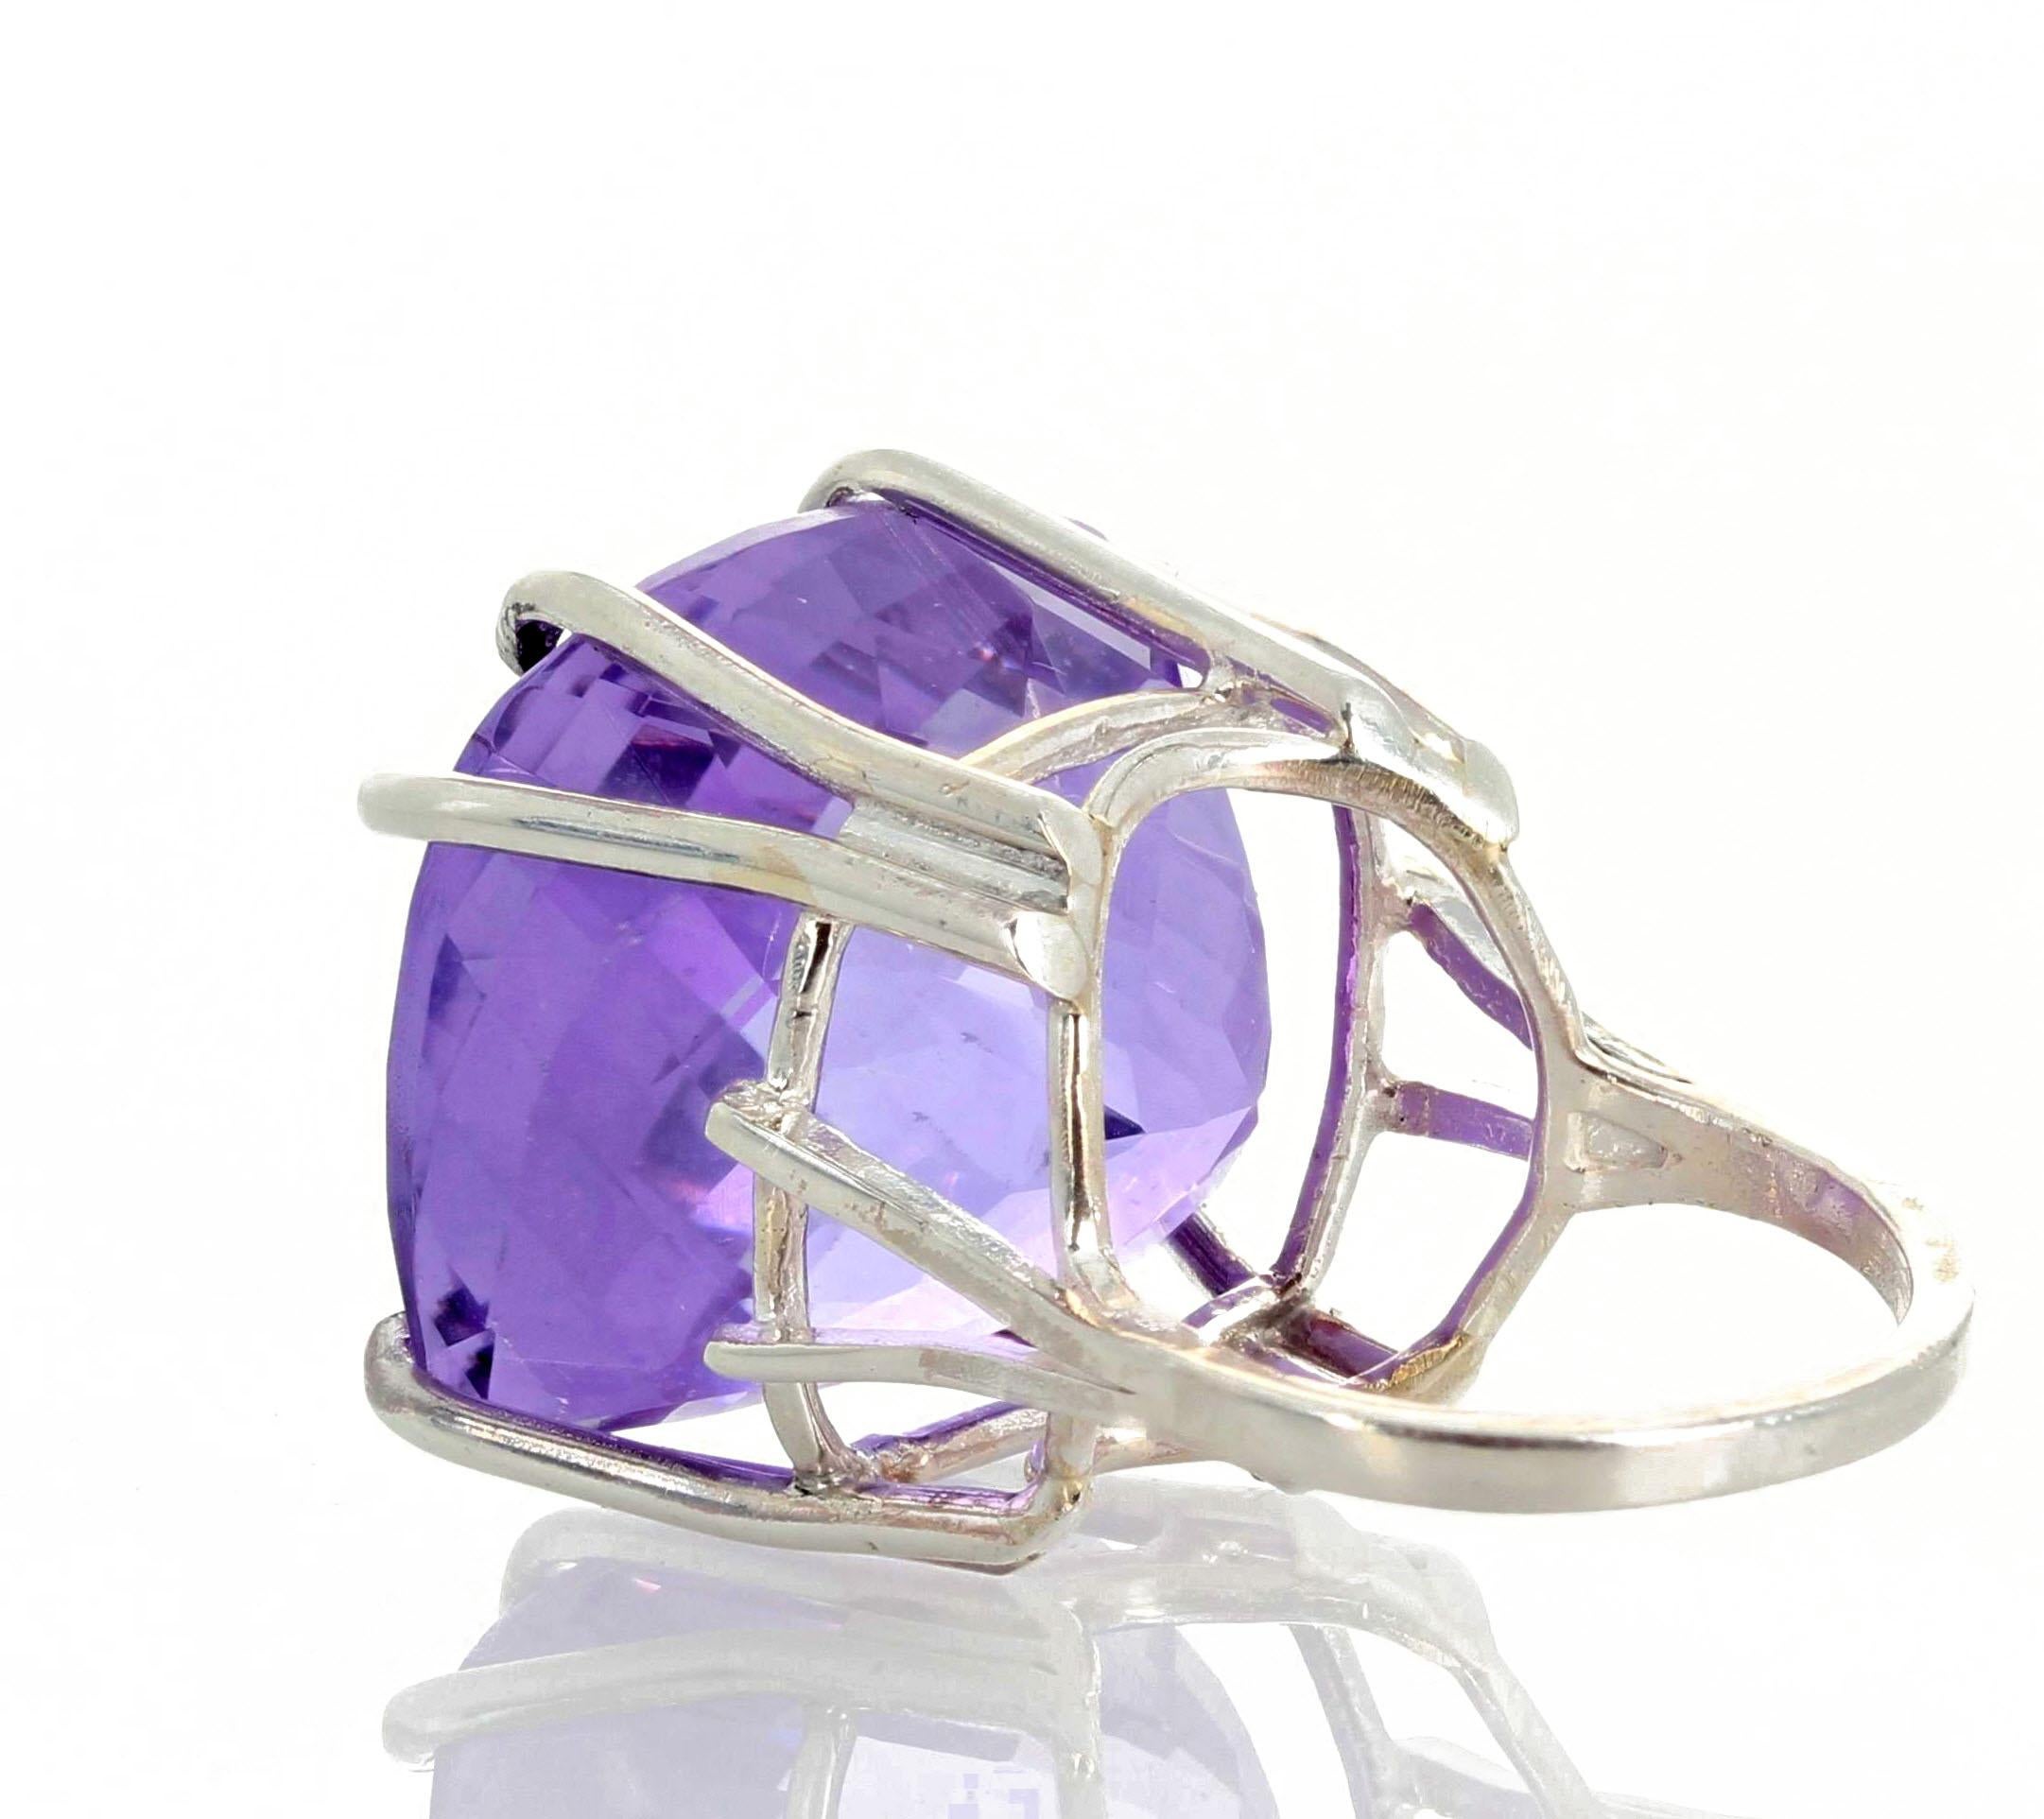 Cushion Cut AJD Magnificent Whoppingly Enormous 44 Carat Exquisite Amethyst Silver Ring